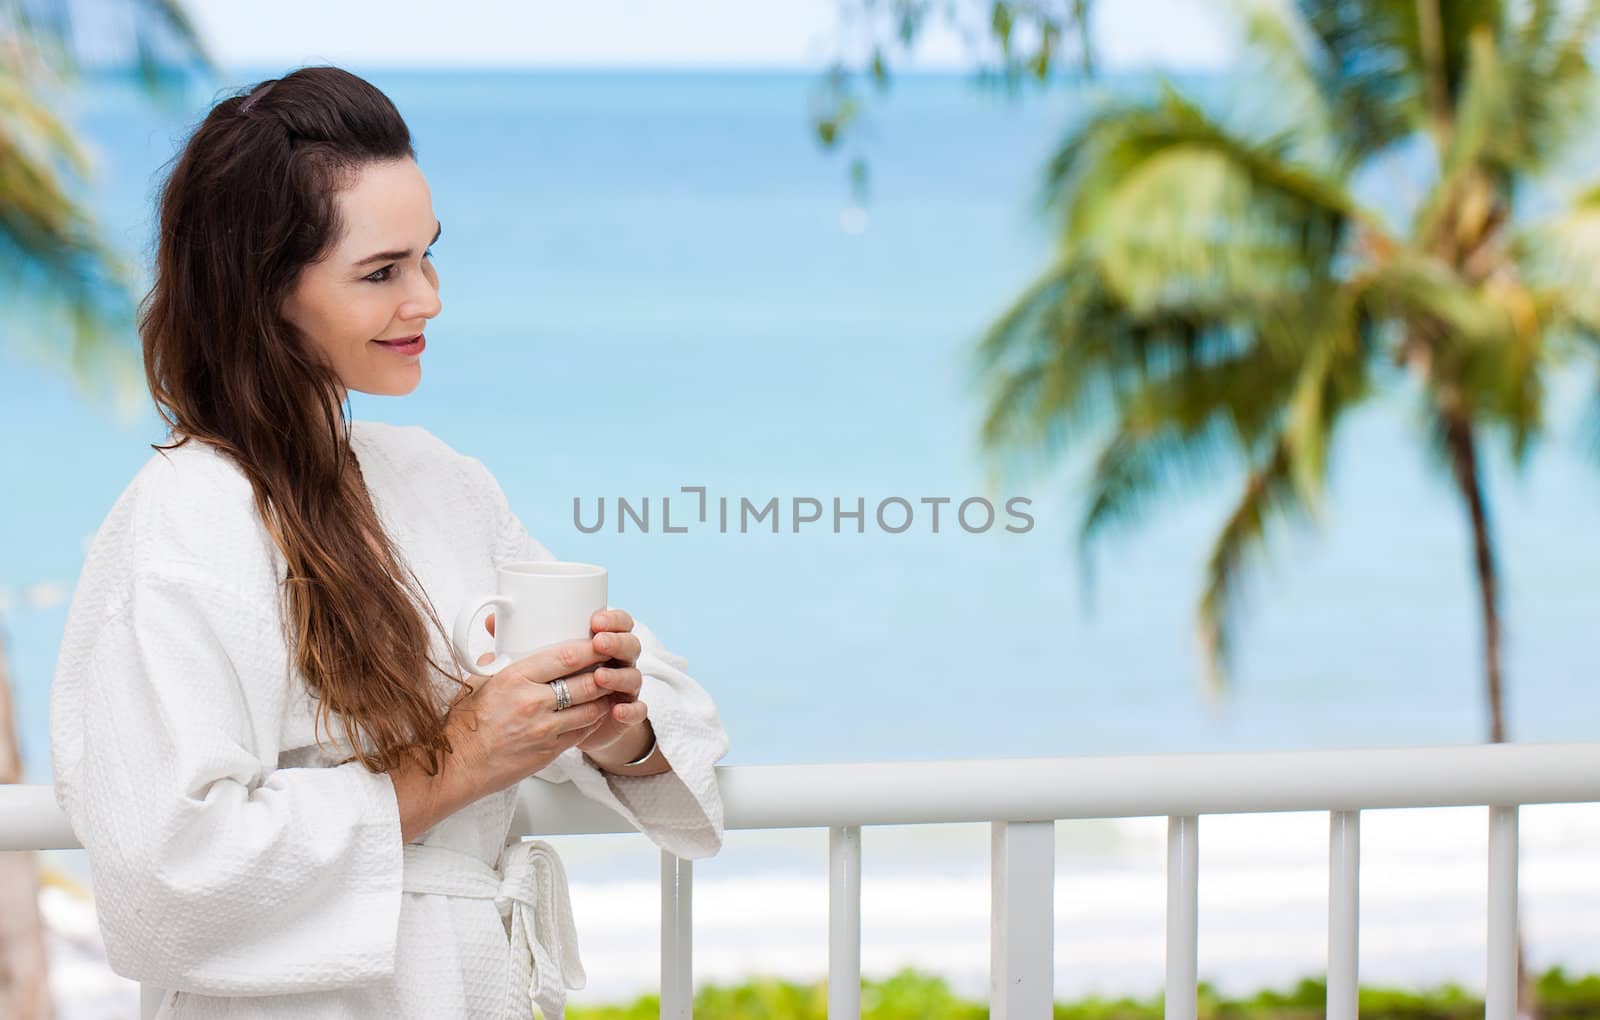 Portrait of a beautiful woman relaxing wit her breakfast coffee or tea on a tropical balcony.